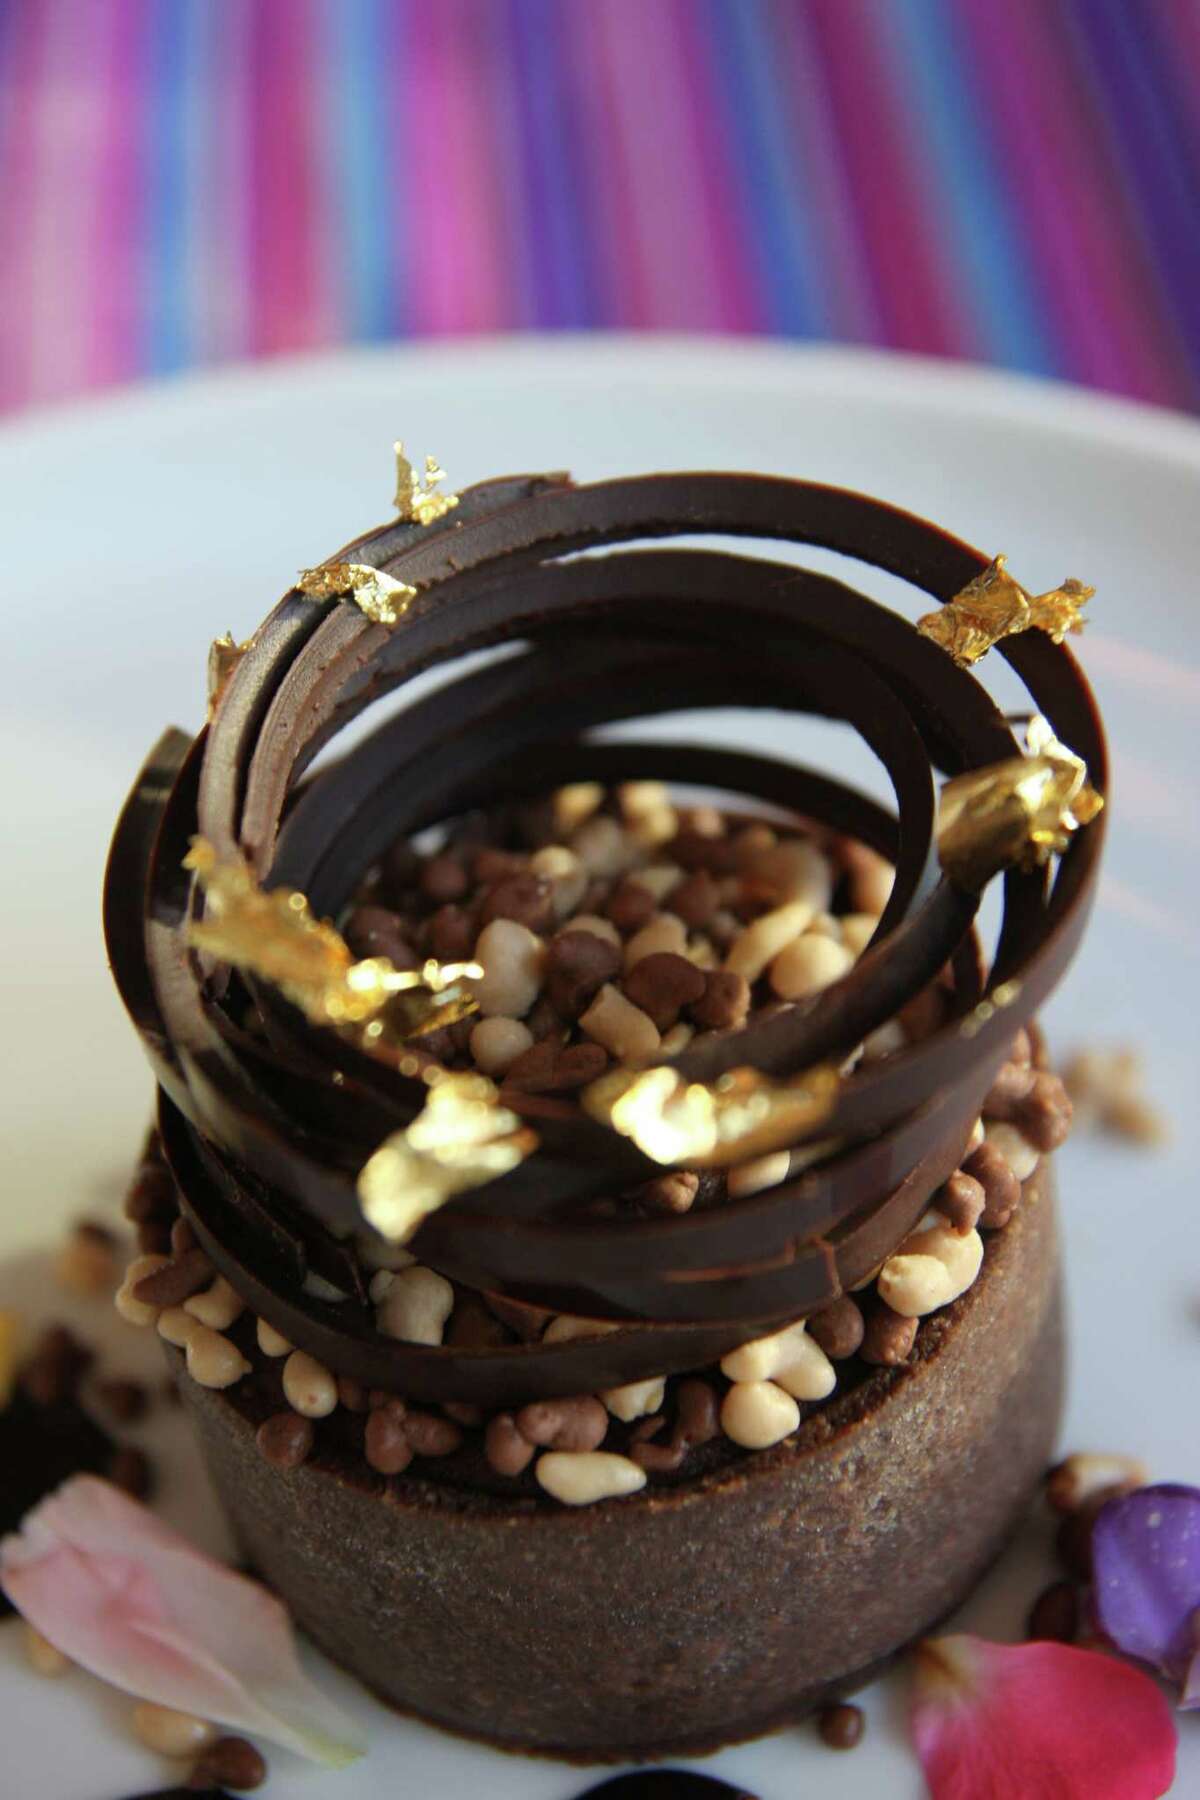 Chef Hugo Ortega and restaurateur Tracy Vaught of H Town Restaurant Group have opened Xochi, a new restaurant in the Marriott Marquis Houston in January 2017. Xochi's menu will focus on the food and drink of Oaxaca, Mexico. Shown: Pastry Chef Ruben Ortega's elaborate Piedras y Oro chocolate dessert.